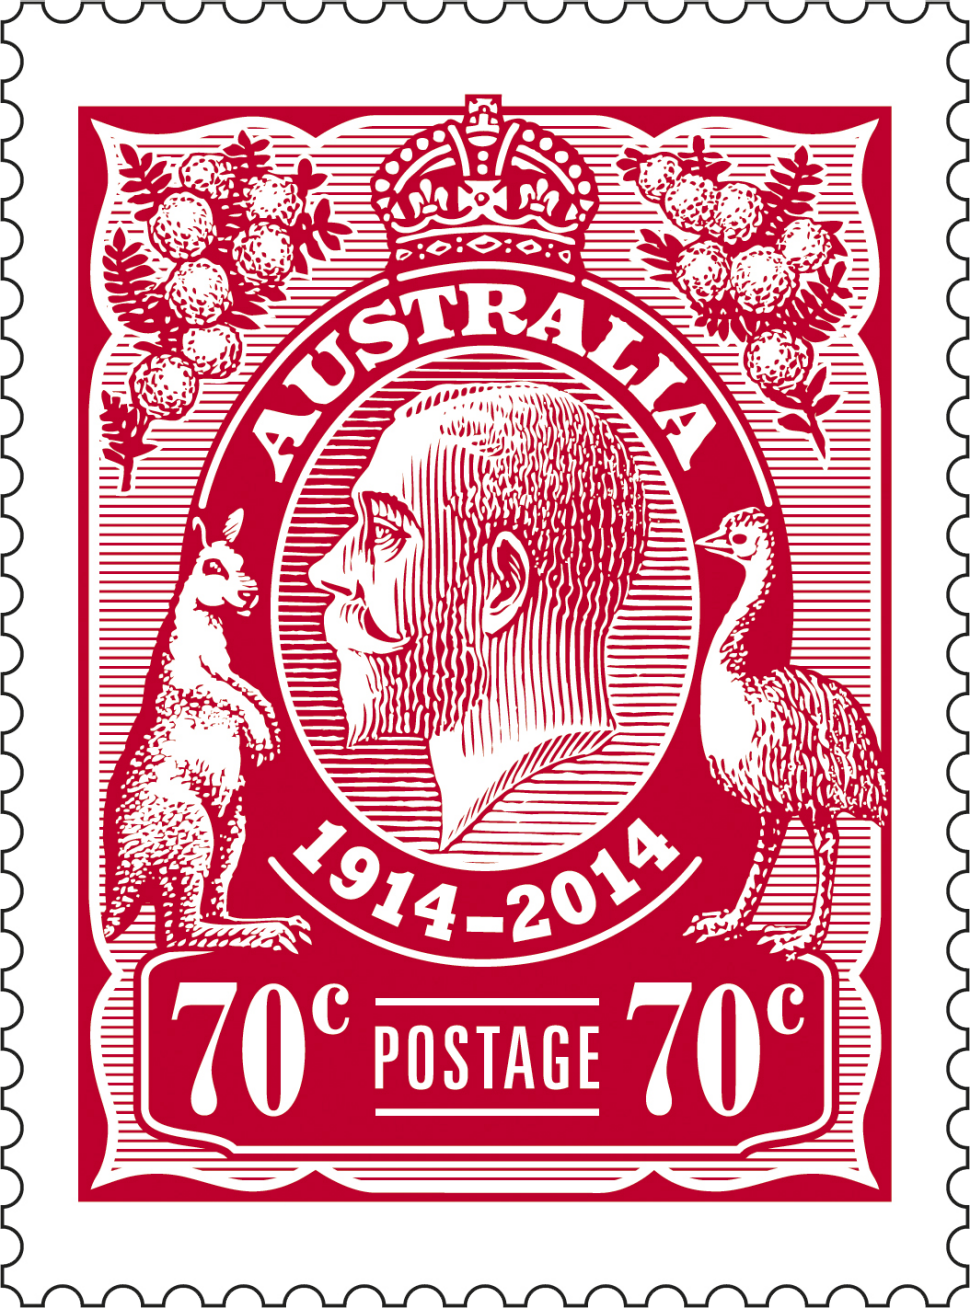 King George V Centenary of Stamps 1914–2014